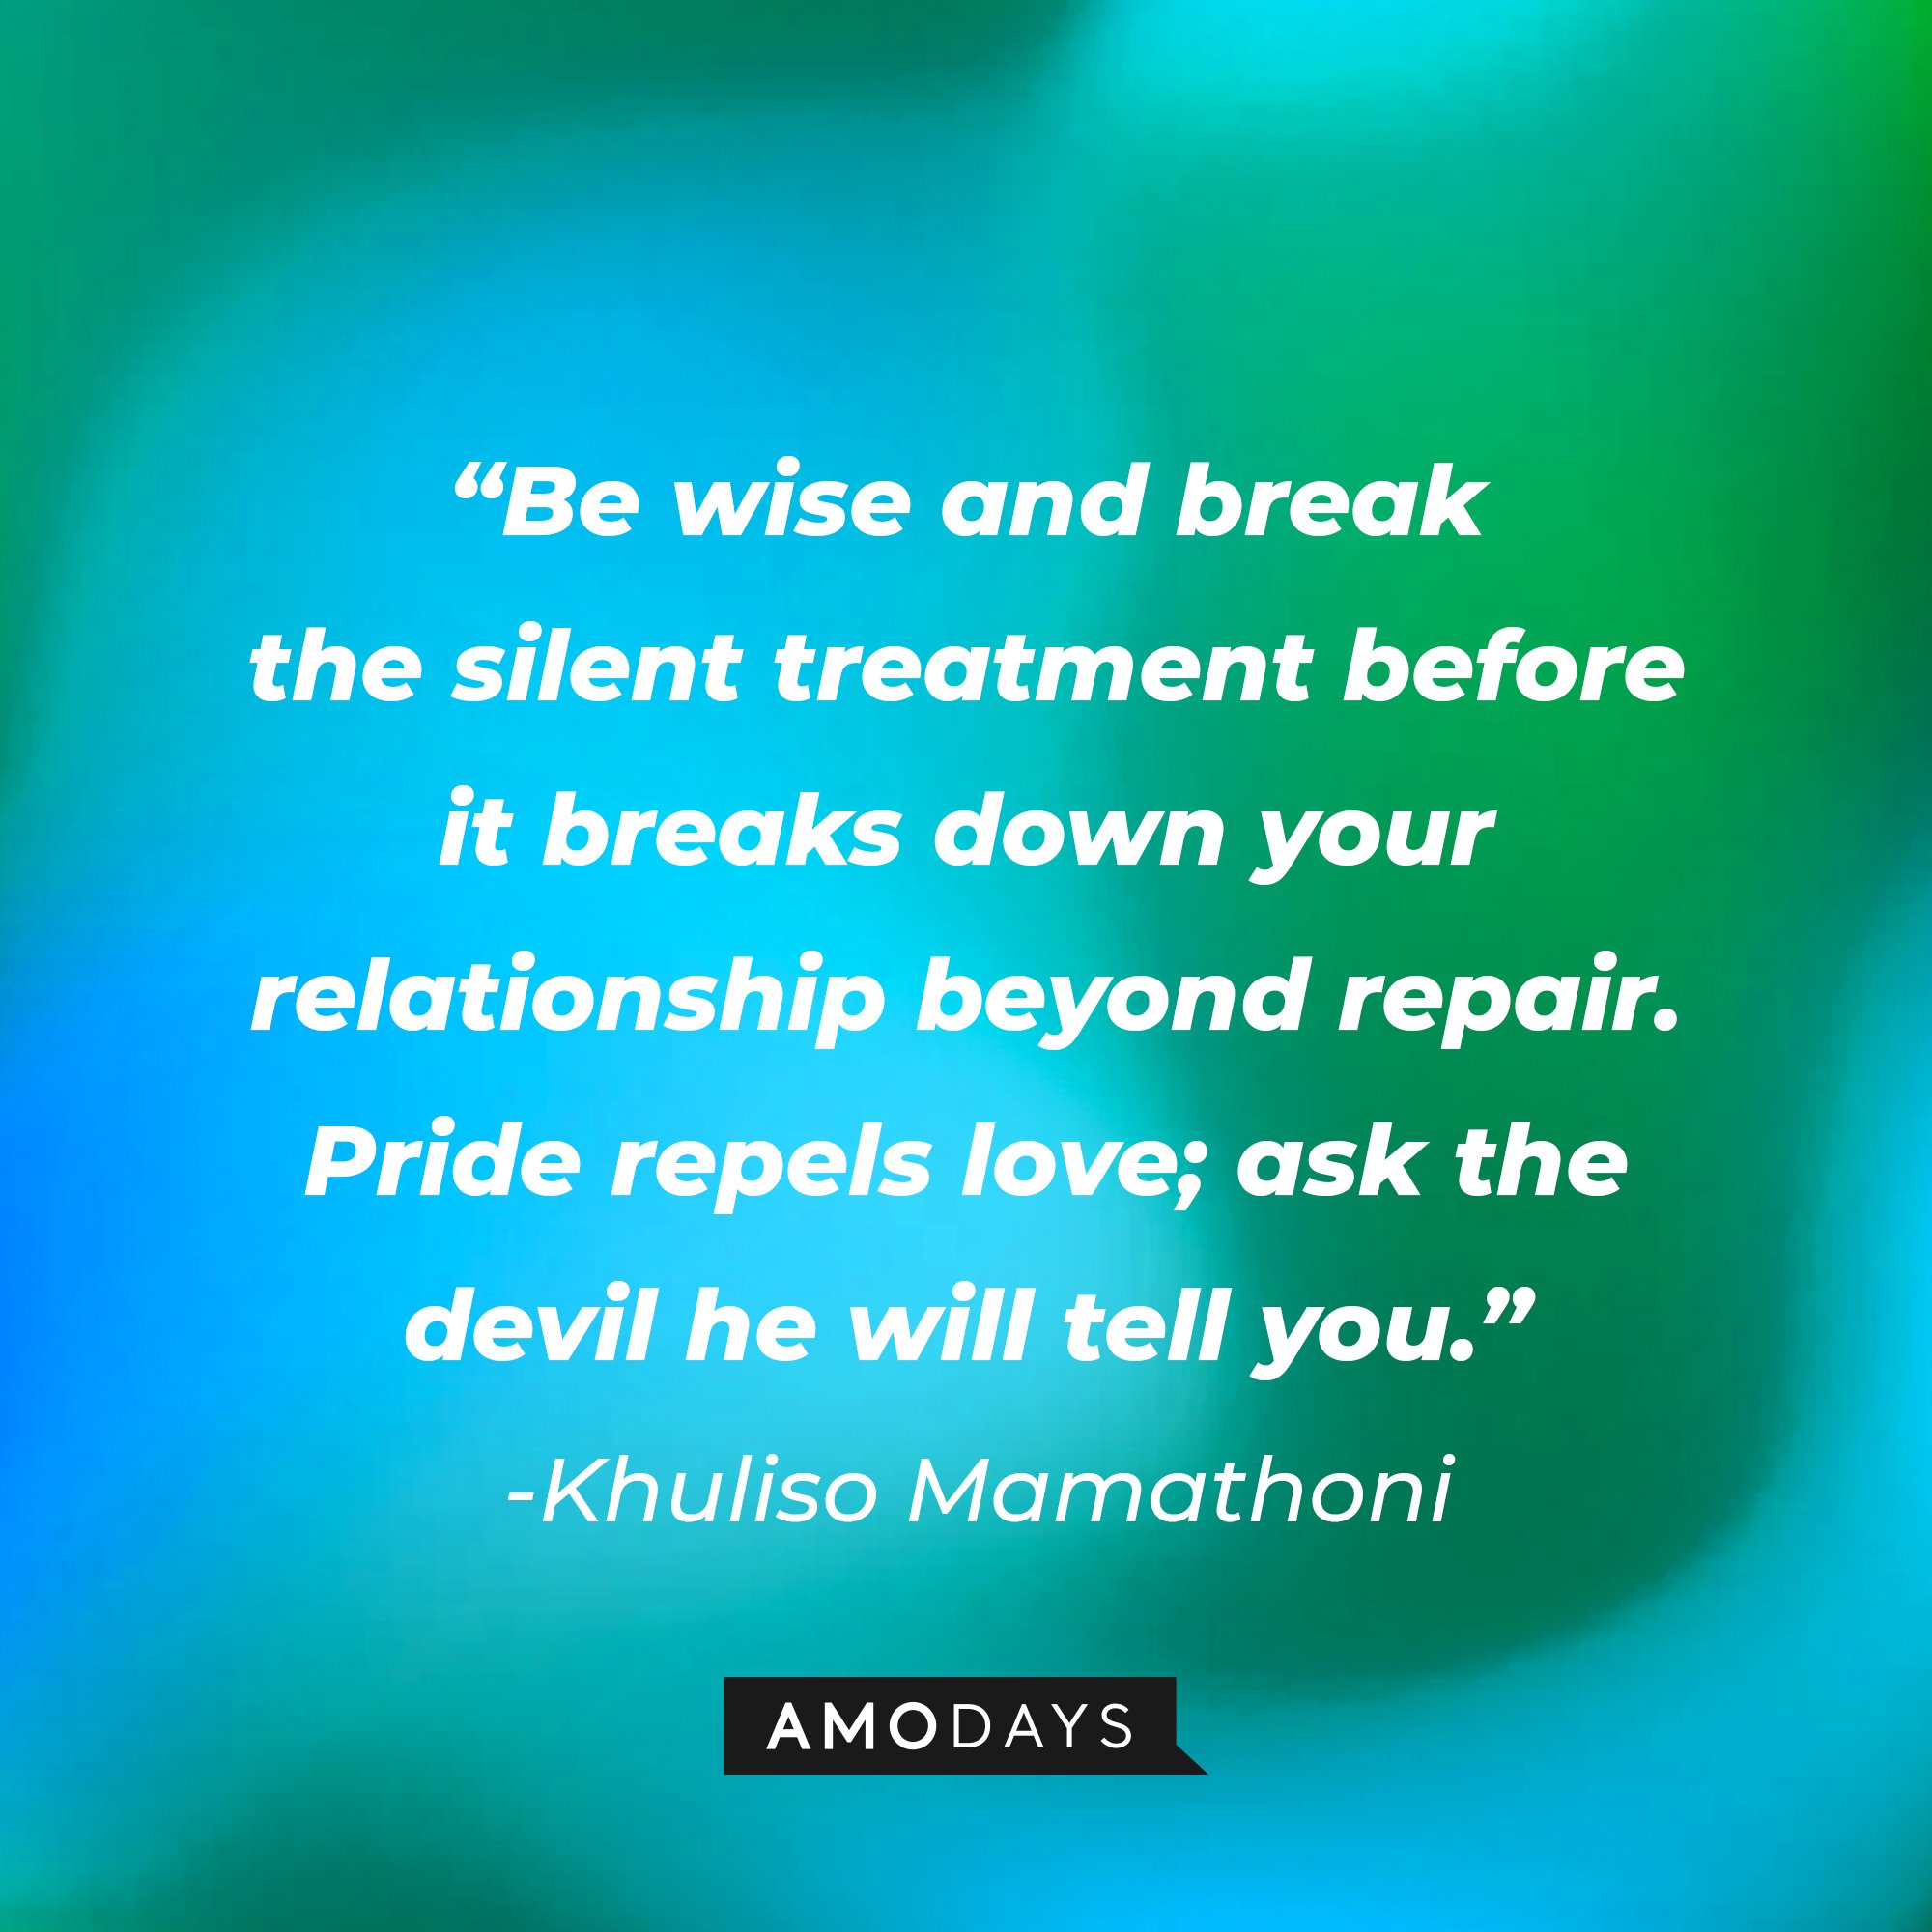 Khuliso Mamathoni's quote:\\\\u00a0"Be wise and break the silent treatment before it breaks down your relationship beyond repair. Pride repels love ask the devil he will tell you."\\\\u00a0| Image: AmoDays